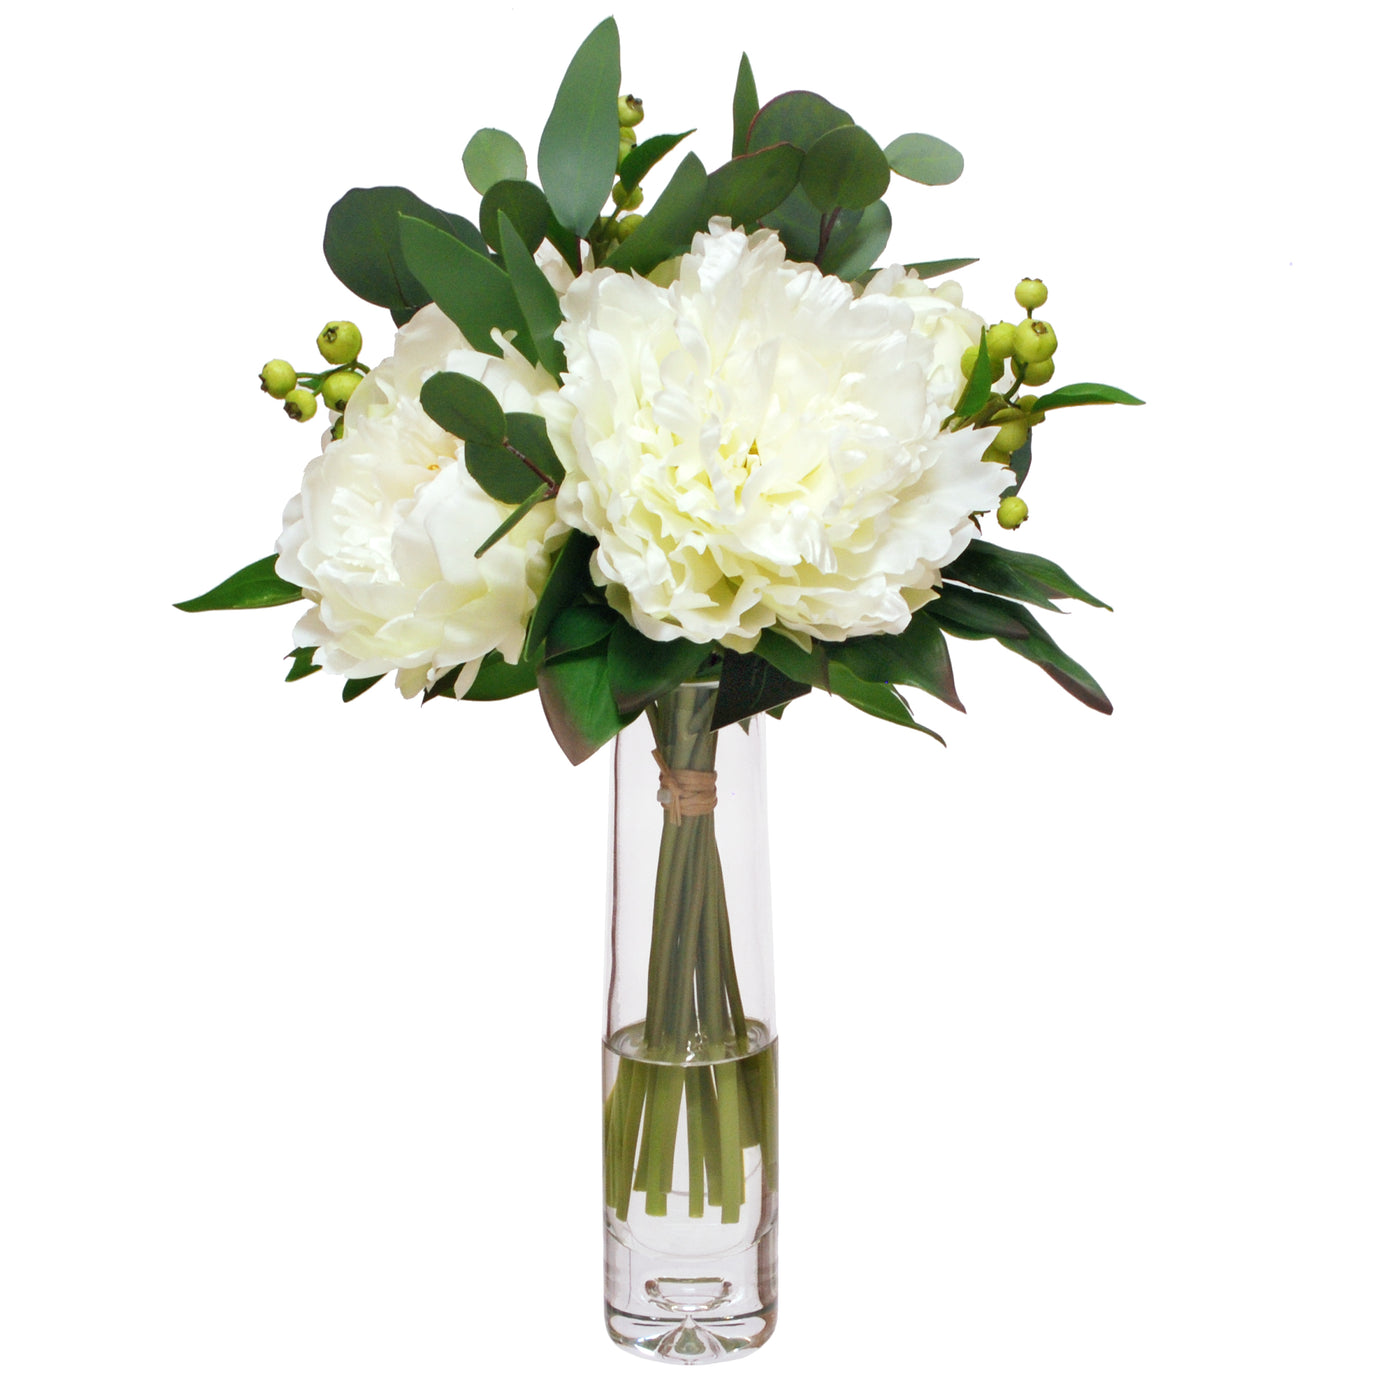 High-quality white faux peonies in tall clear cylinder glass vase